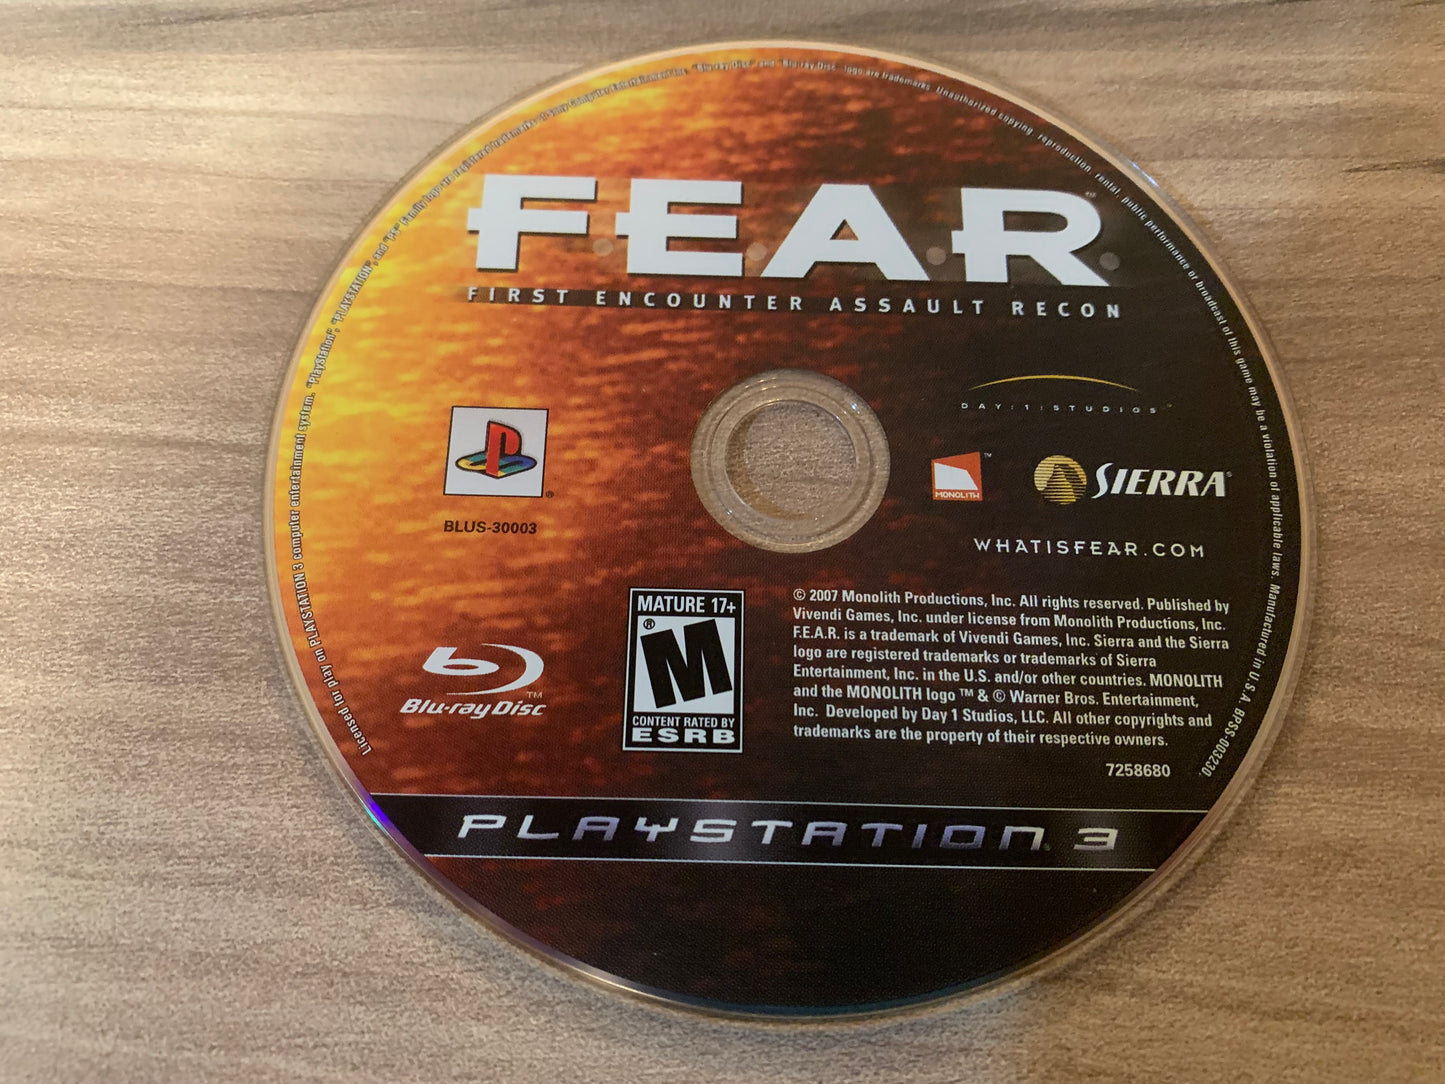 SONY PLAYSTATiON 3 [PS3] | FEAR FiRST ENCOUNTER ASSAULT RECON FEAR